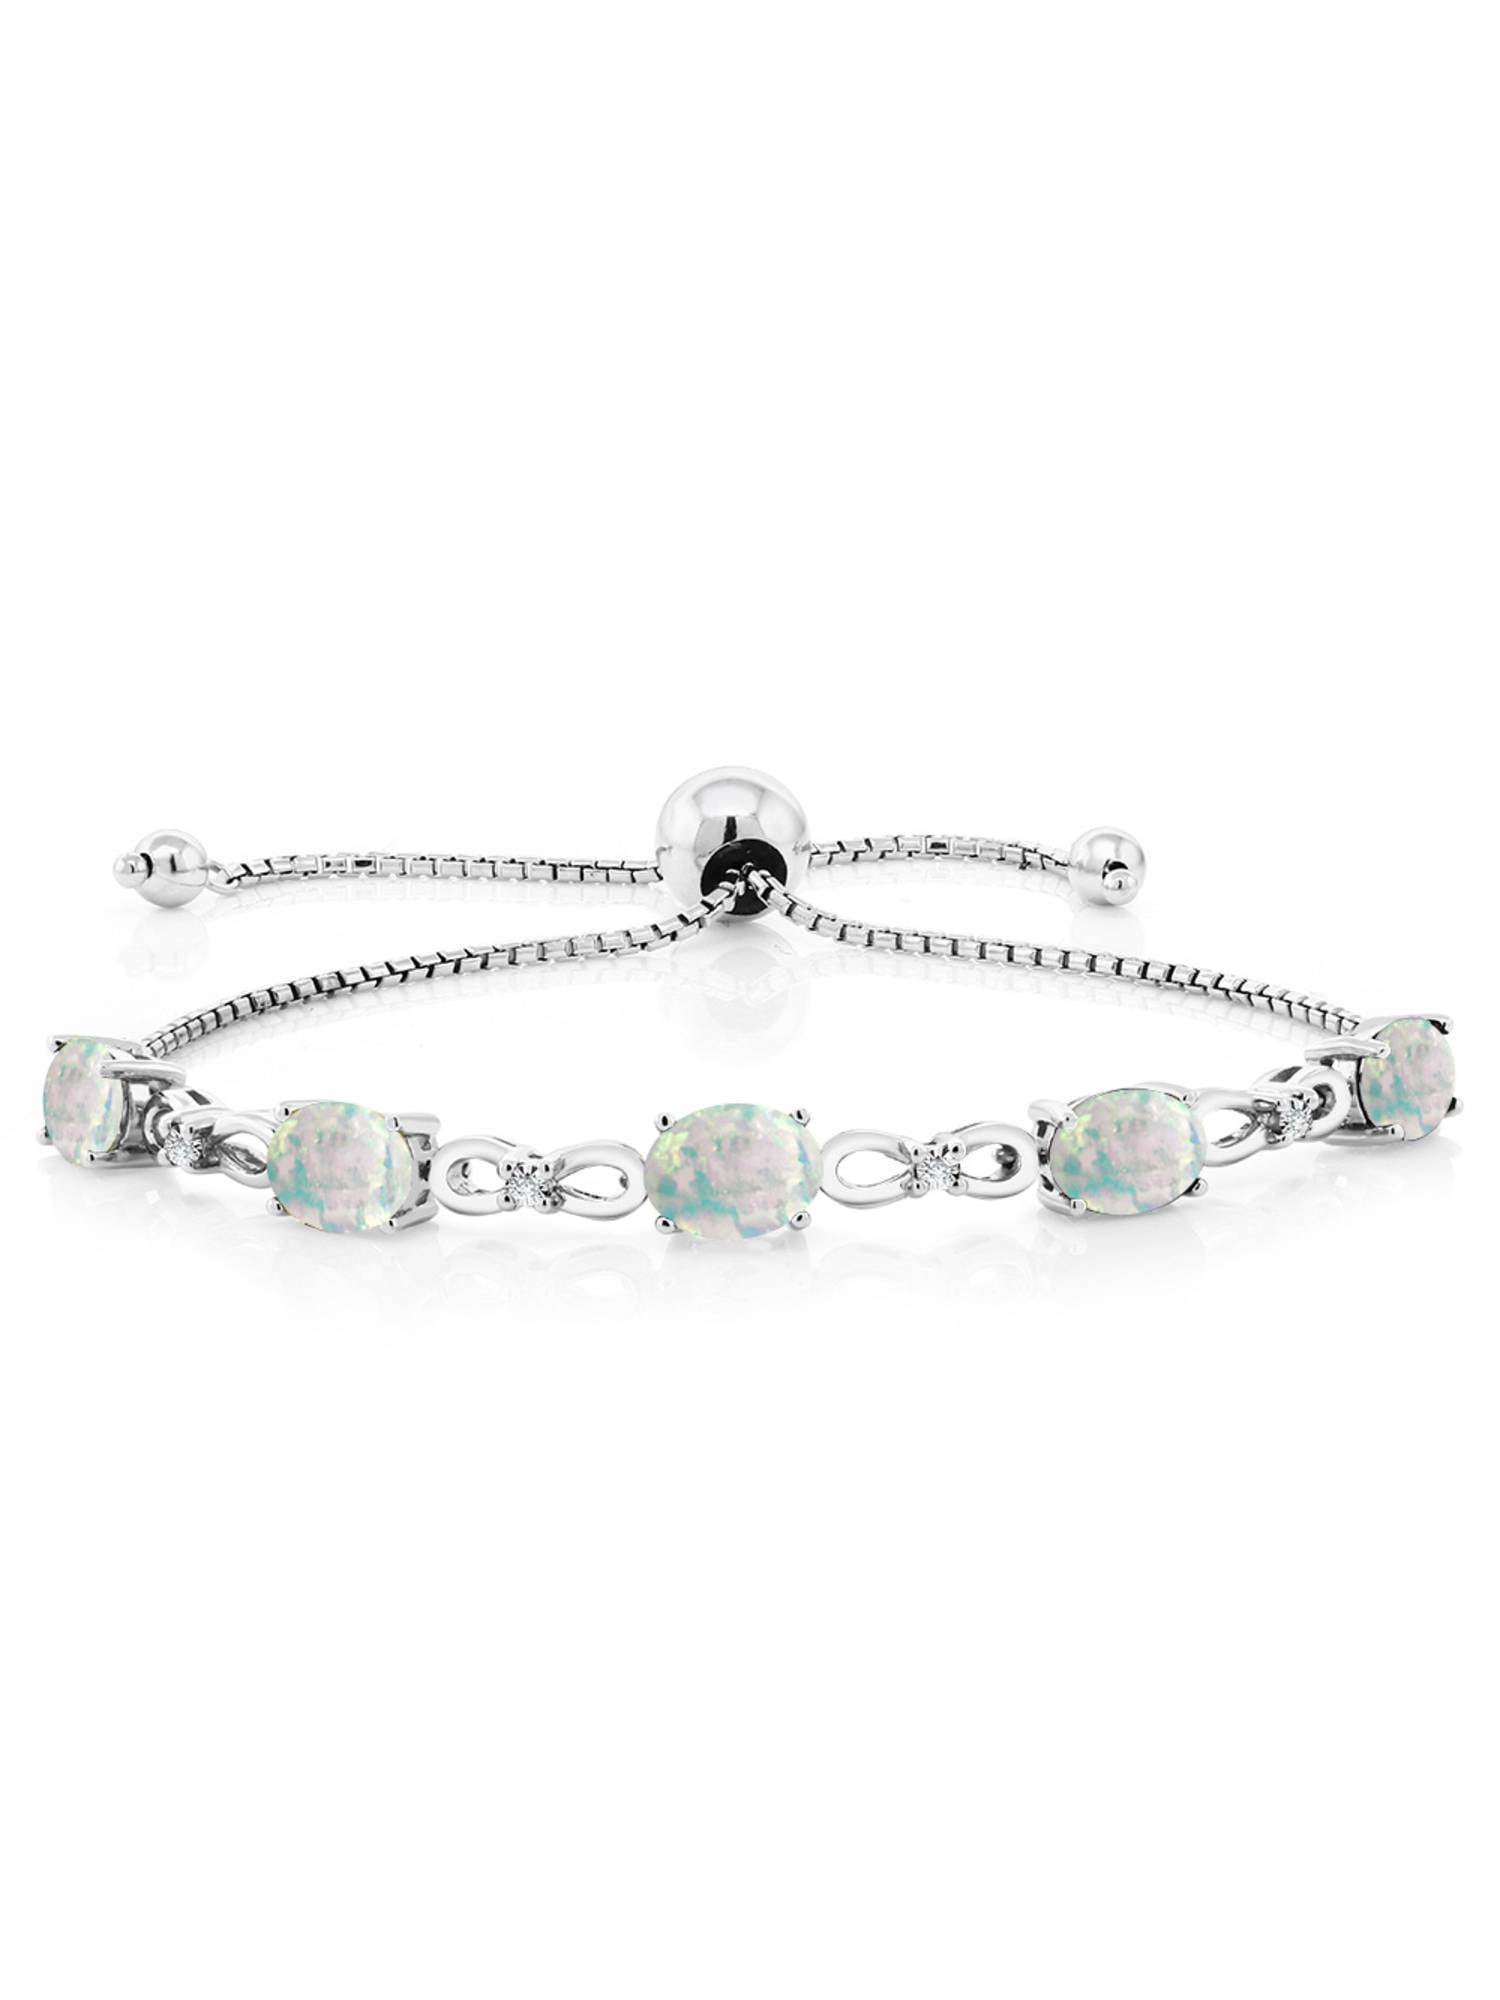 Gem Stone King 9.18 Ct Oval Cabochon White Simulated Opal 925 Sterling Silver 7.5 inches Bracelet 